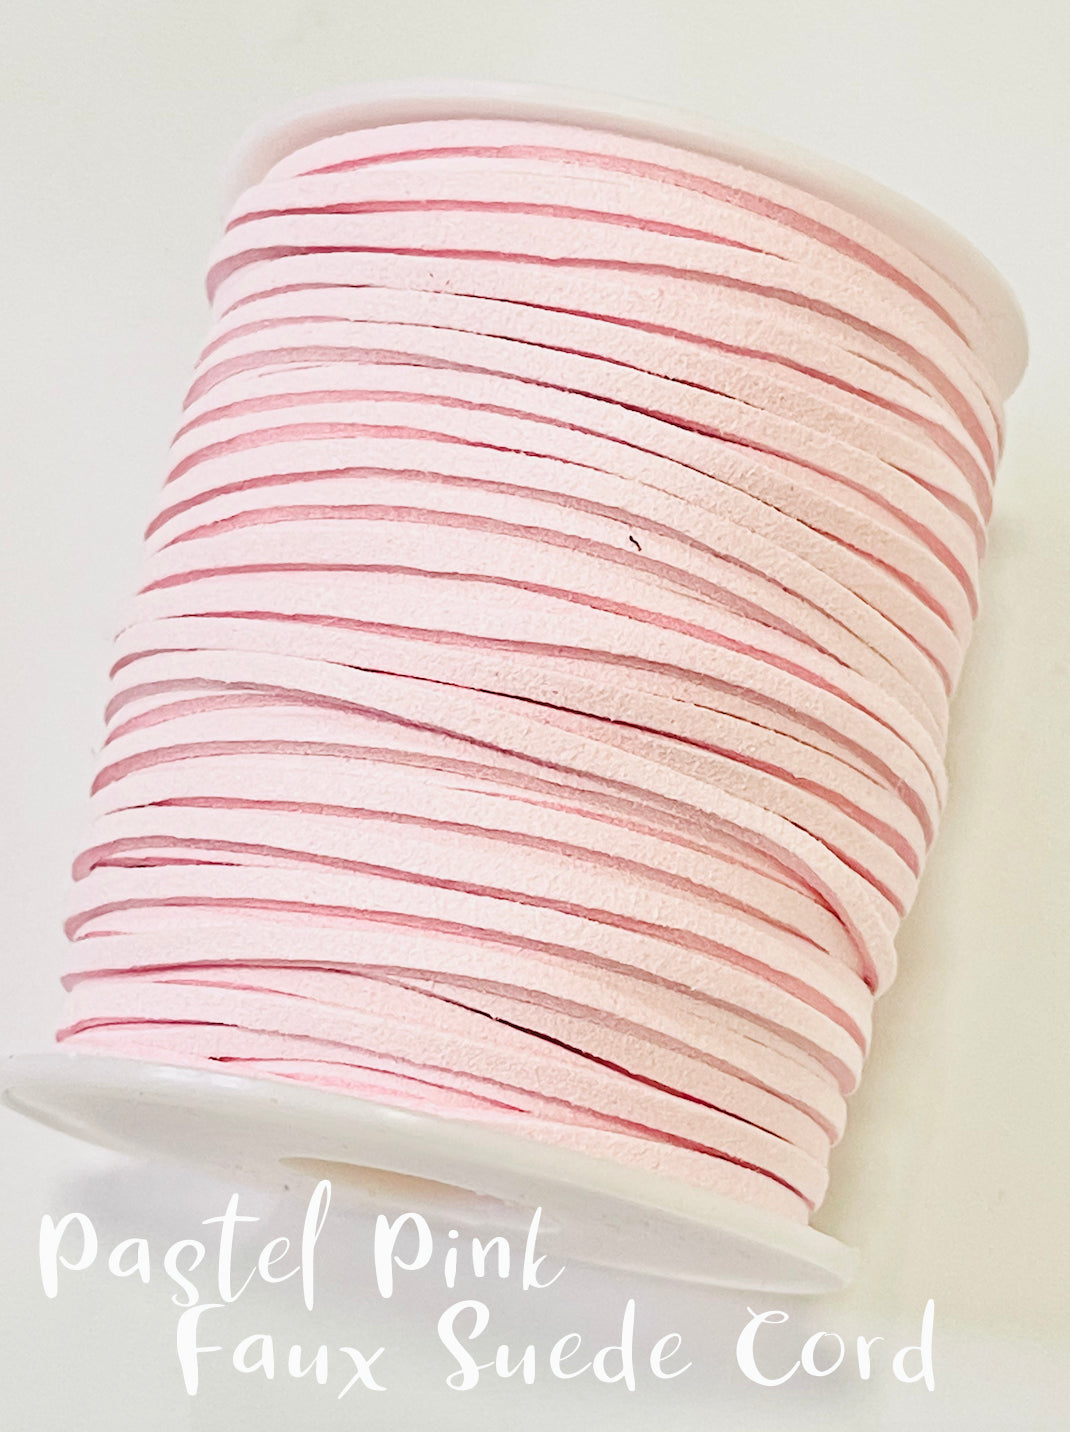 PASTEL Pink Faux Suede Cord - 5m - Baby Pink Suede Cord